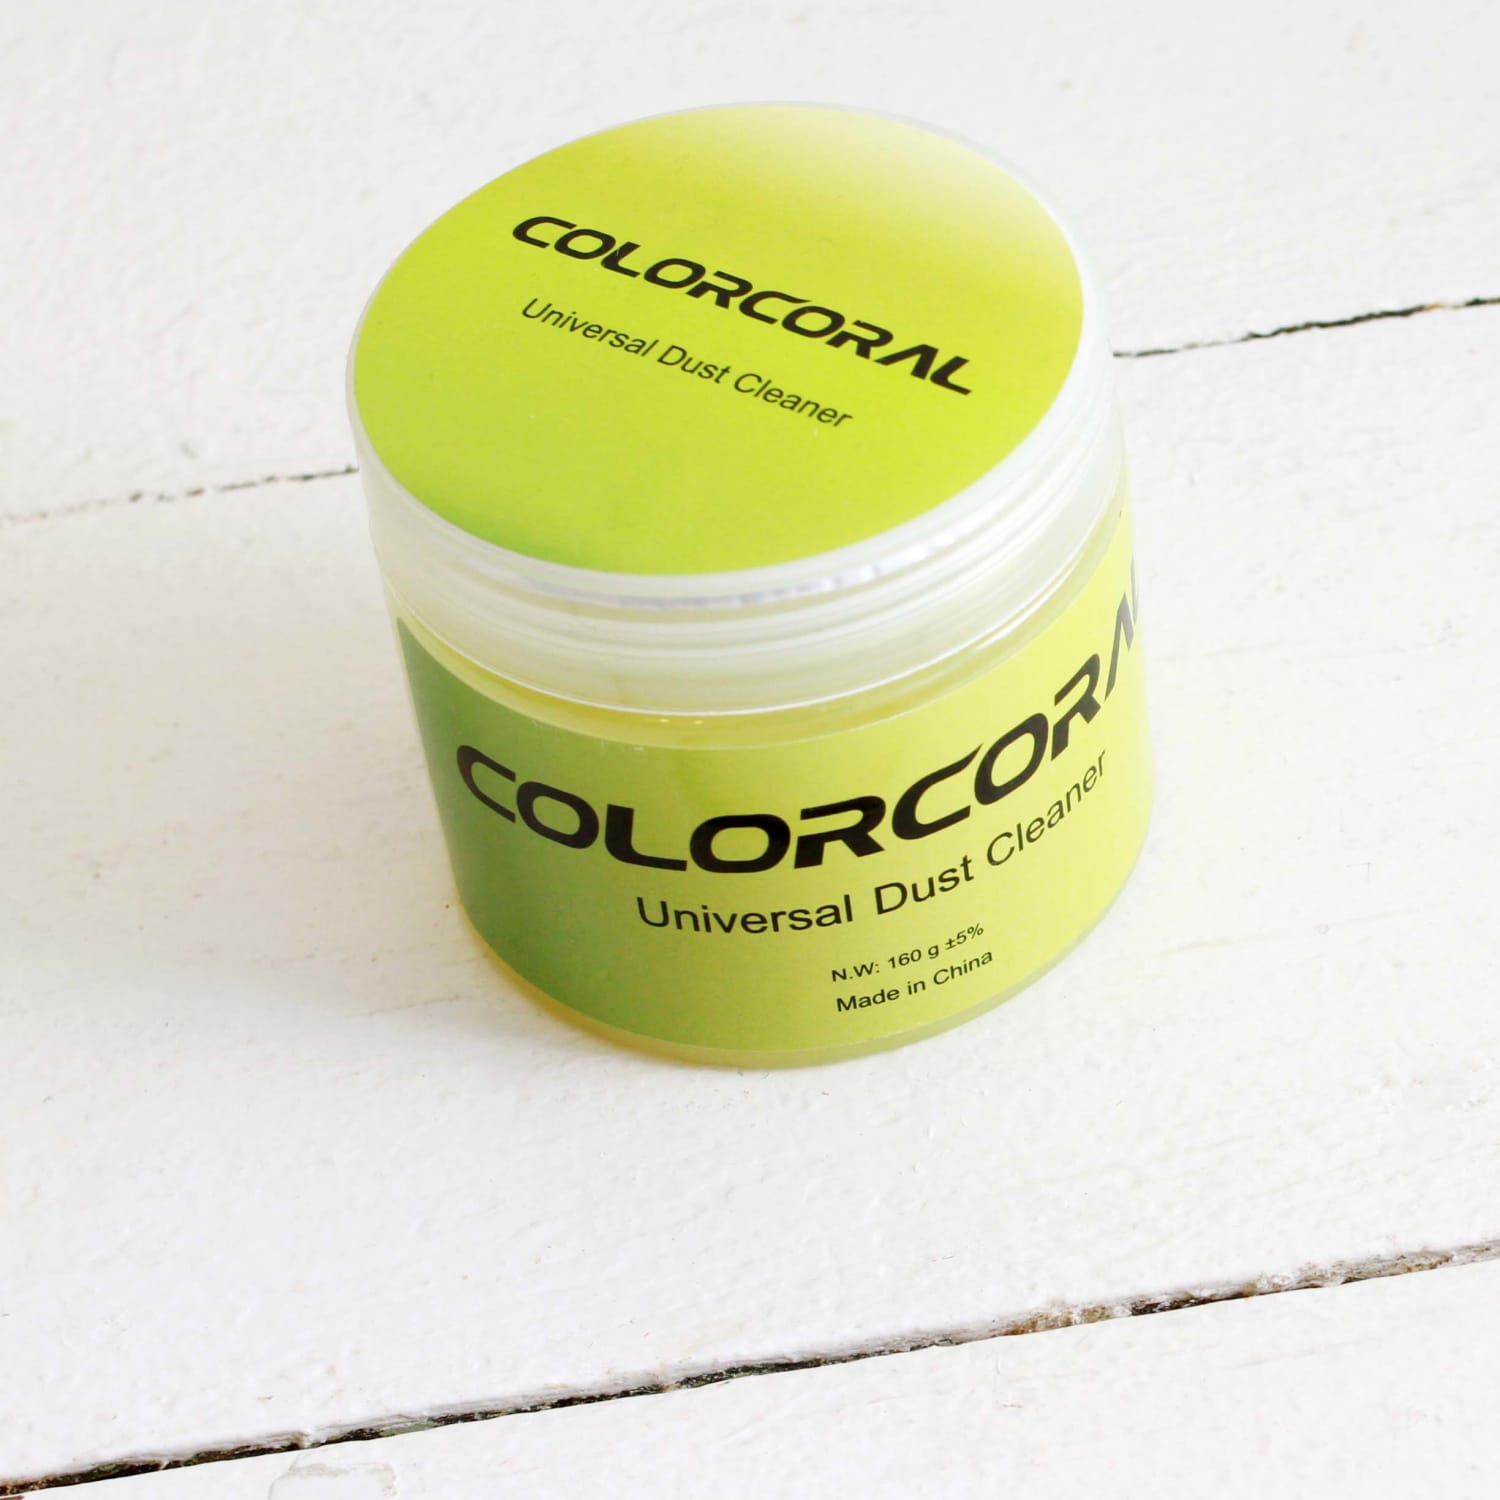 Has anyone used the ColorCoral Gel cleaner (or similar product